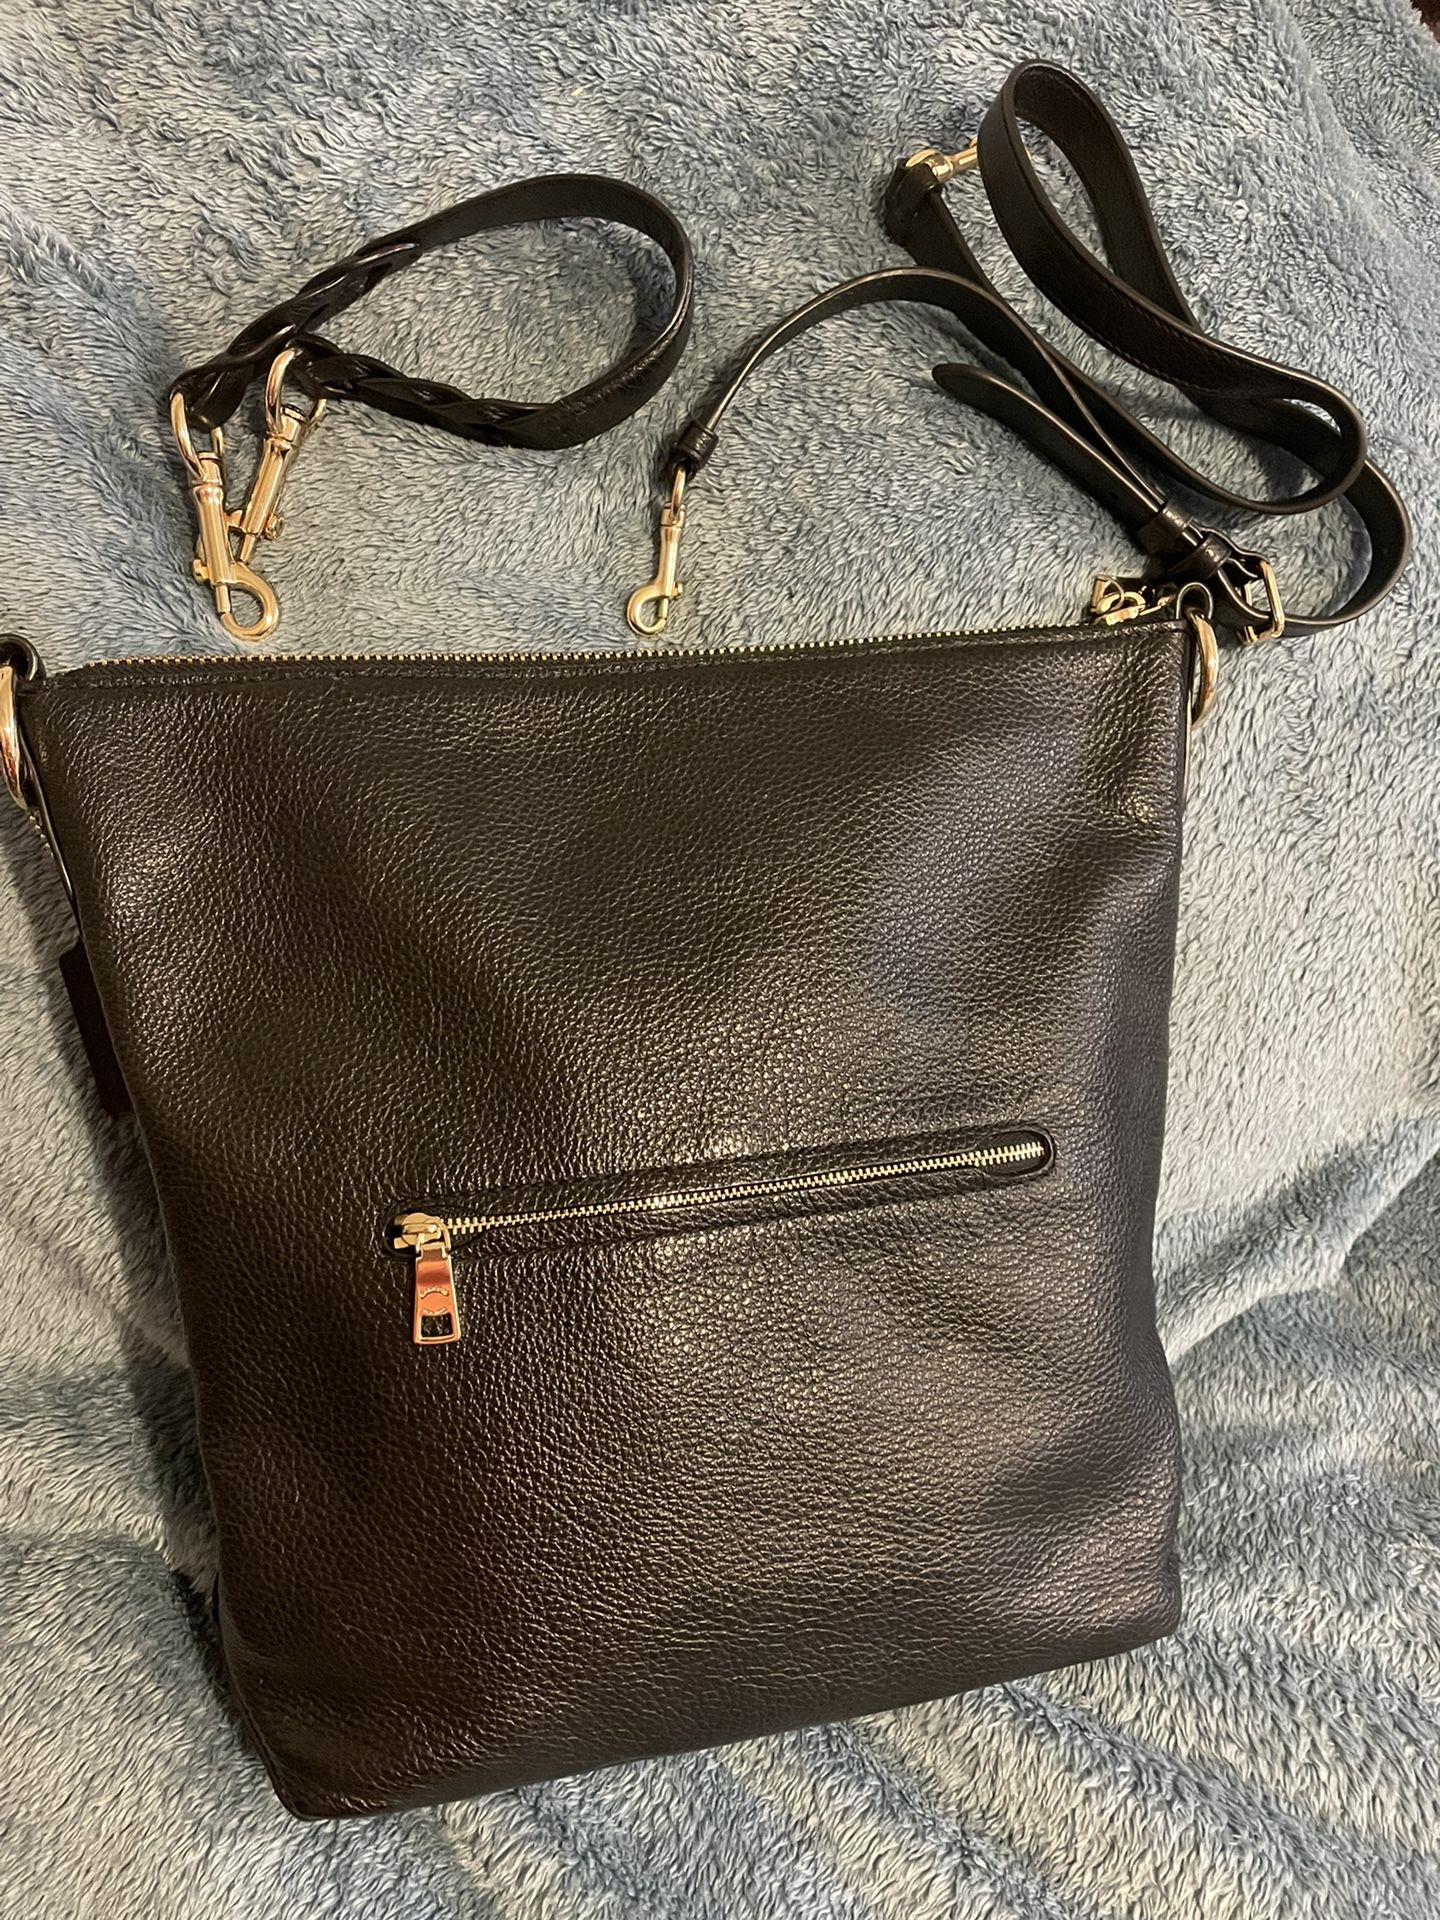 **PRICE REDUCED** Authentic Coach Purse F31507